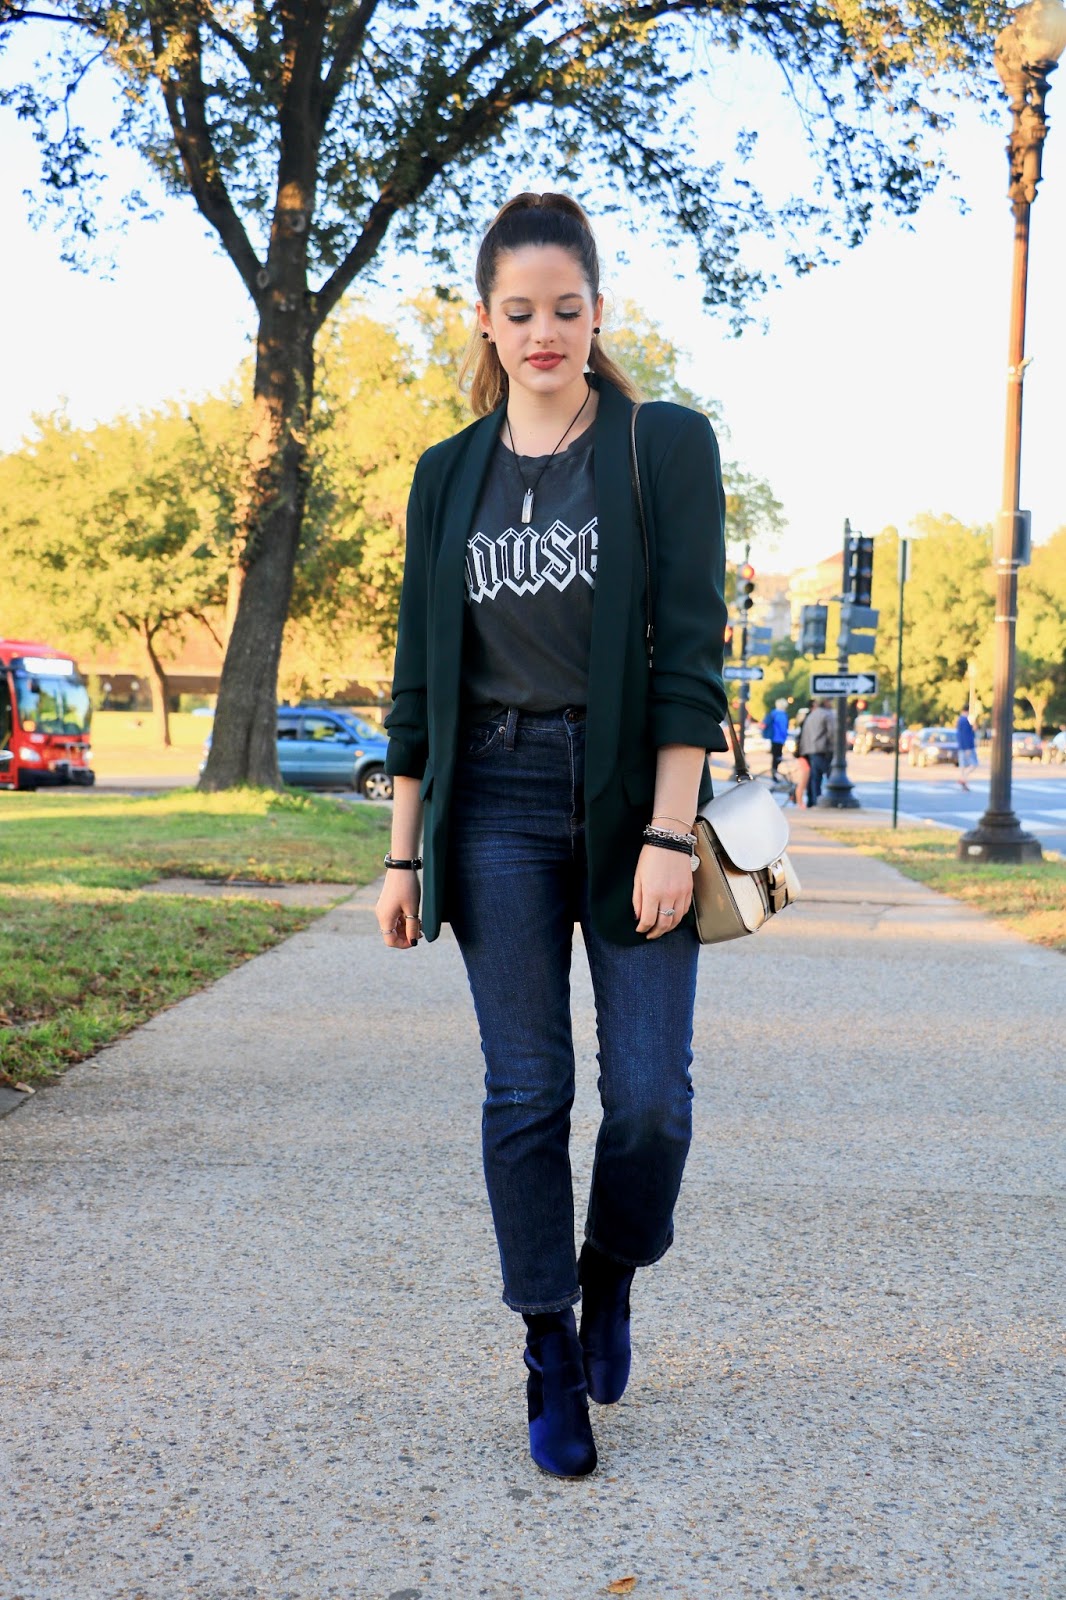 Nyc fashion blogger Kathleen Harper's fall outfit inspiration